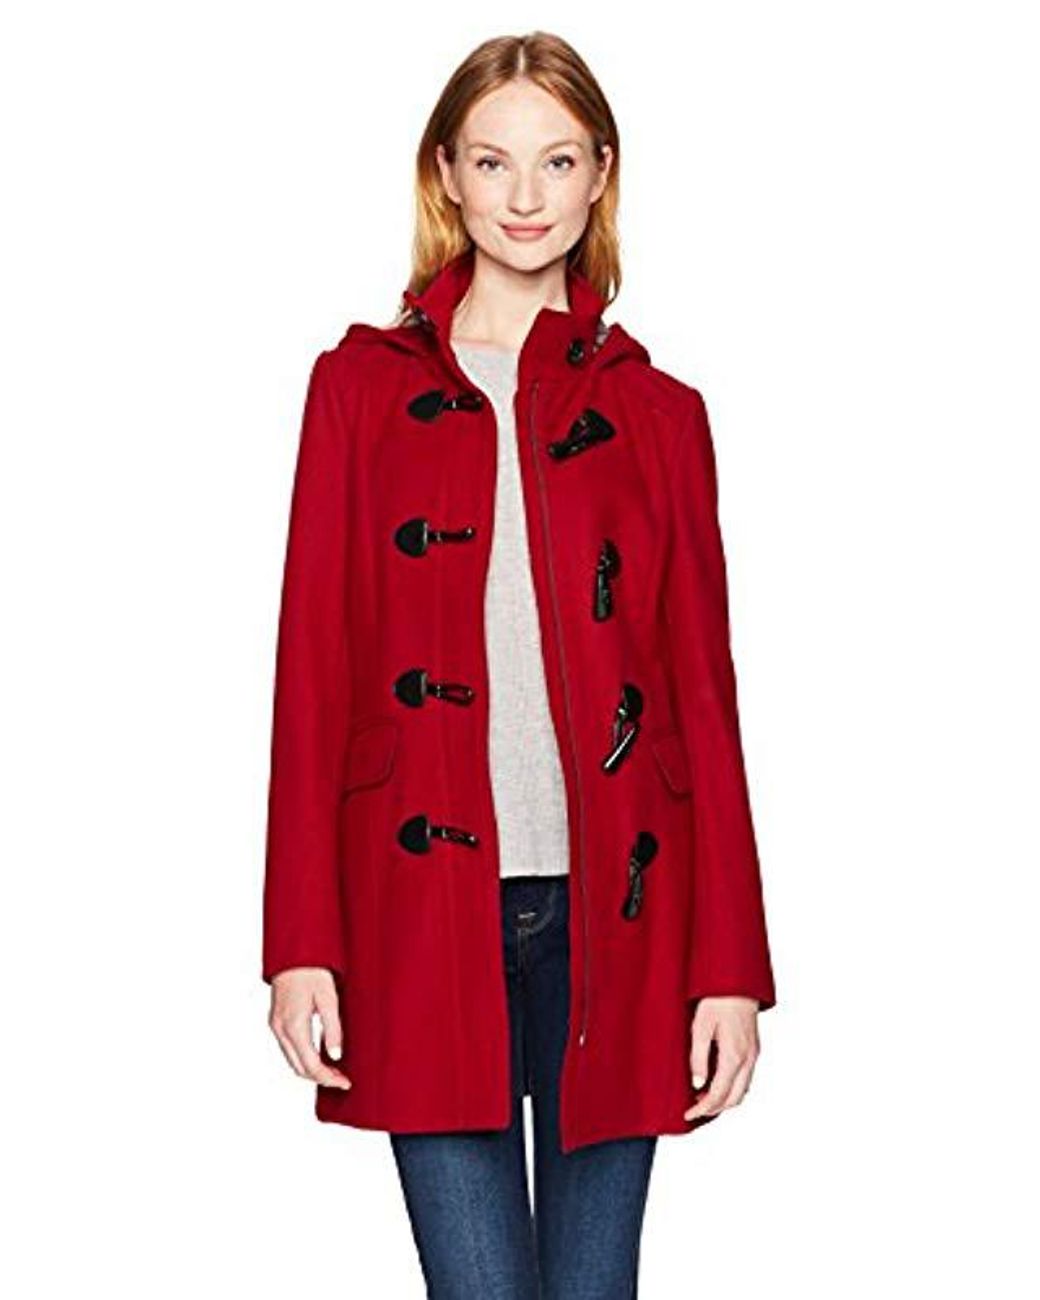 frugtbart kop Vedholdende Tommy Hilfiger Wool Blend Classic Hooded Toggle Coat in Red | Lyst